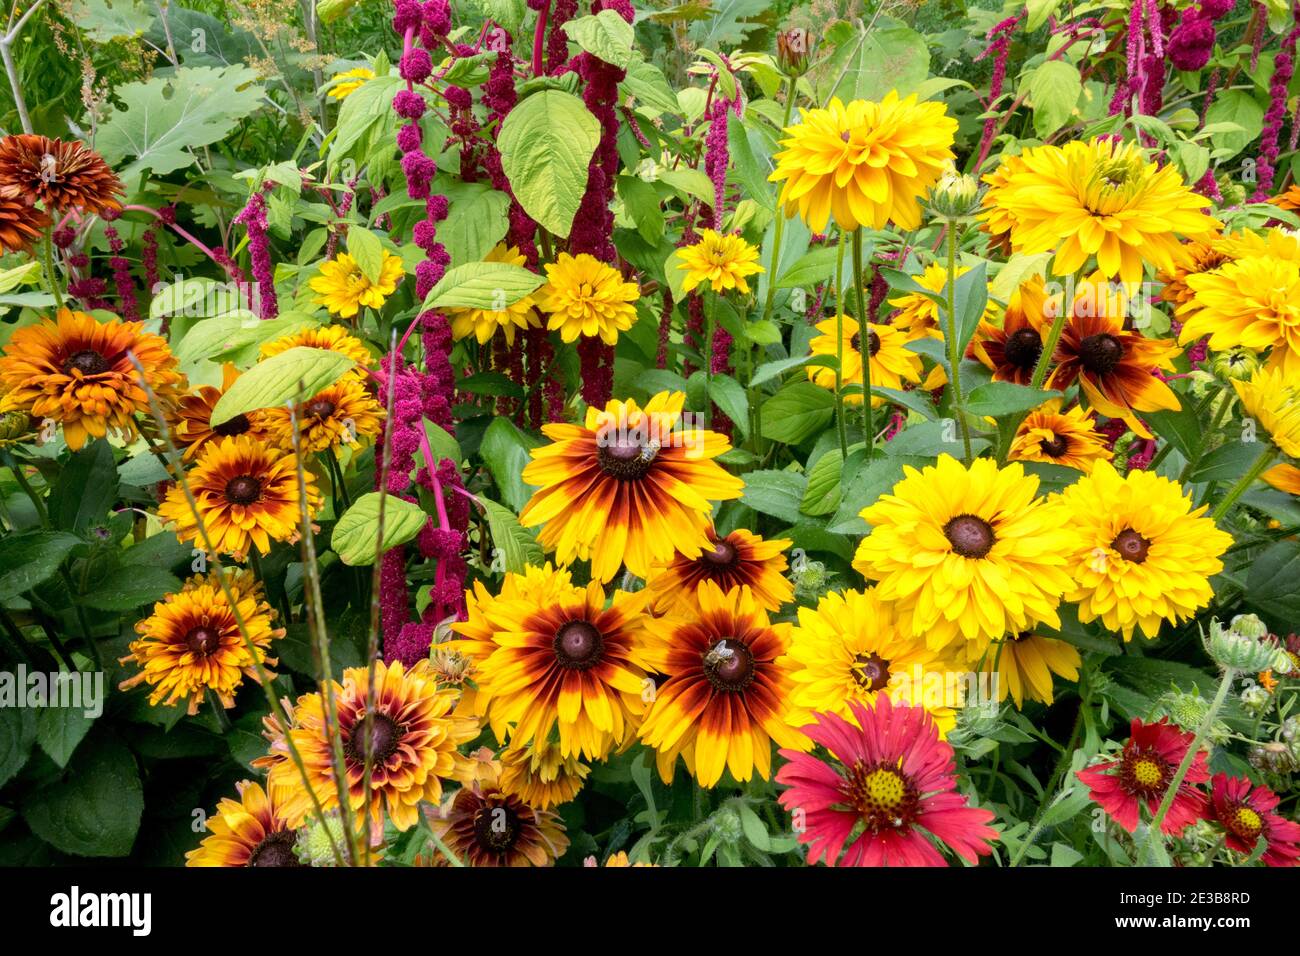 Black-eyed Susans Rudbeckias Amaranth Mid Summer, August Flowers Flowering Herbaceous Garden Colorful, Mixed Flowerbed Yellow Rudbeckia hirta blooming Stock Photo